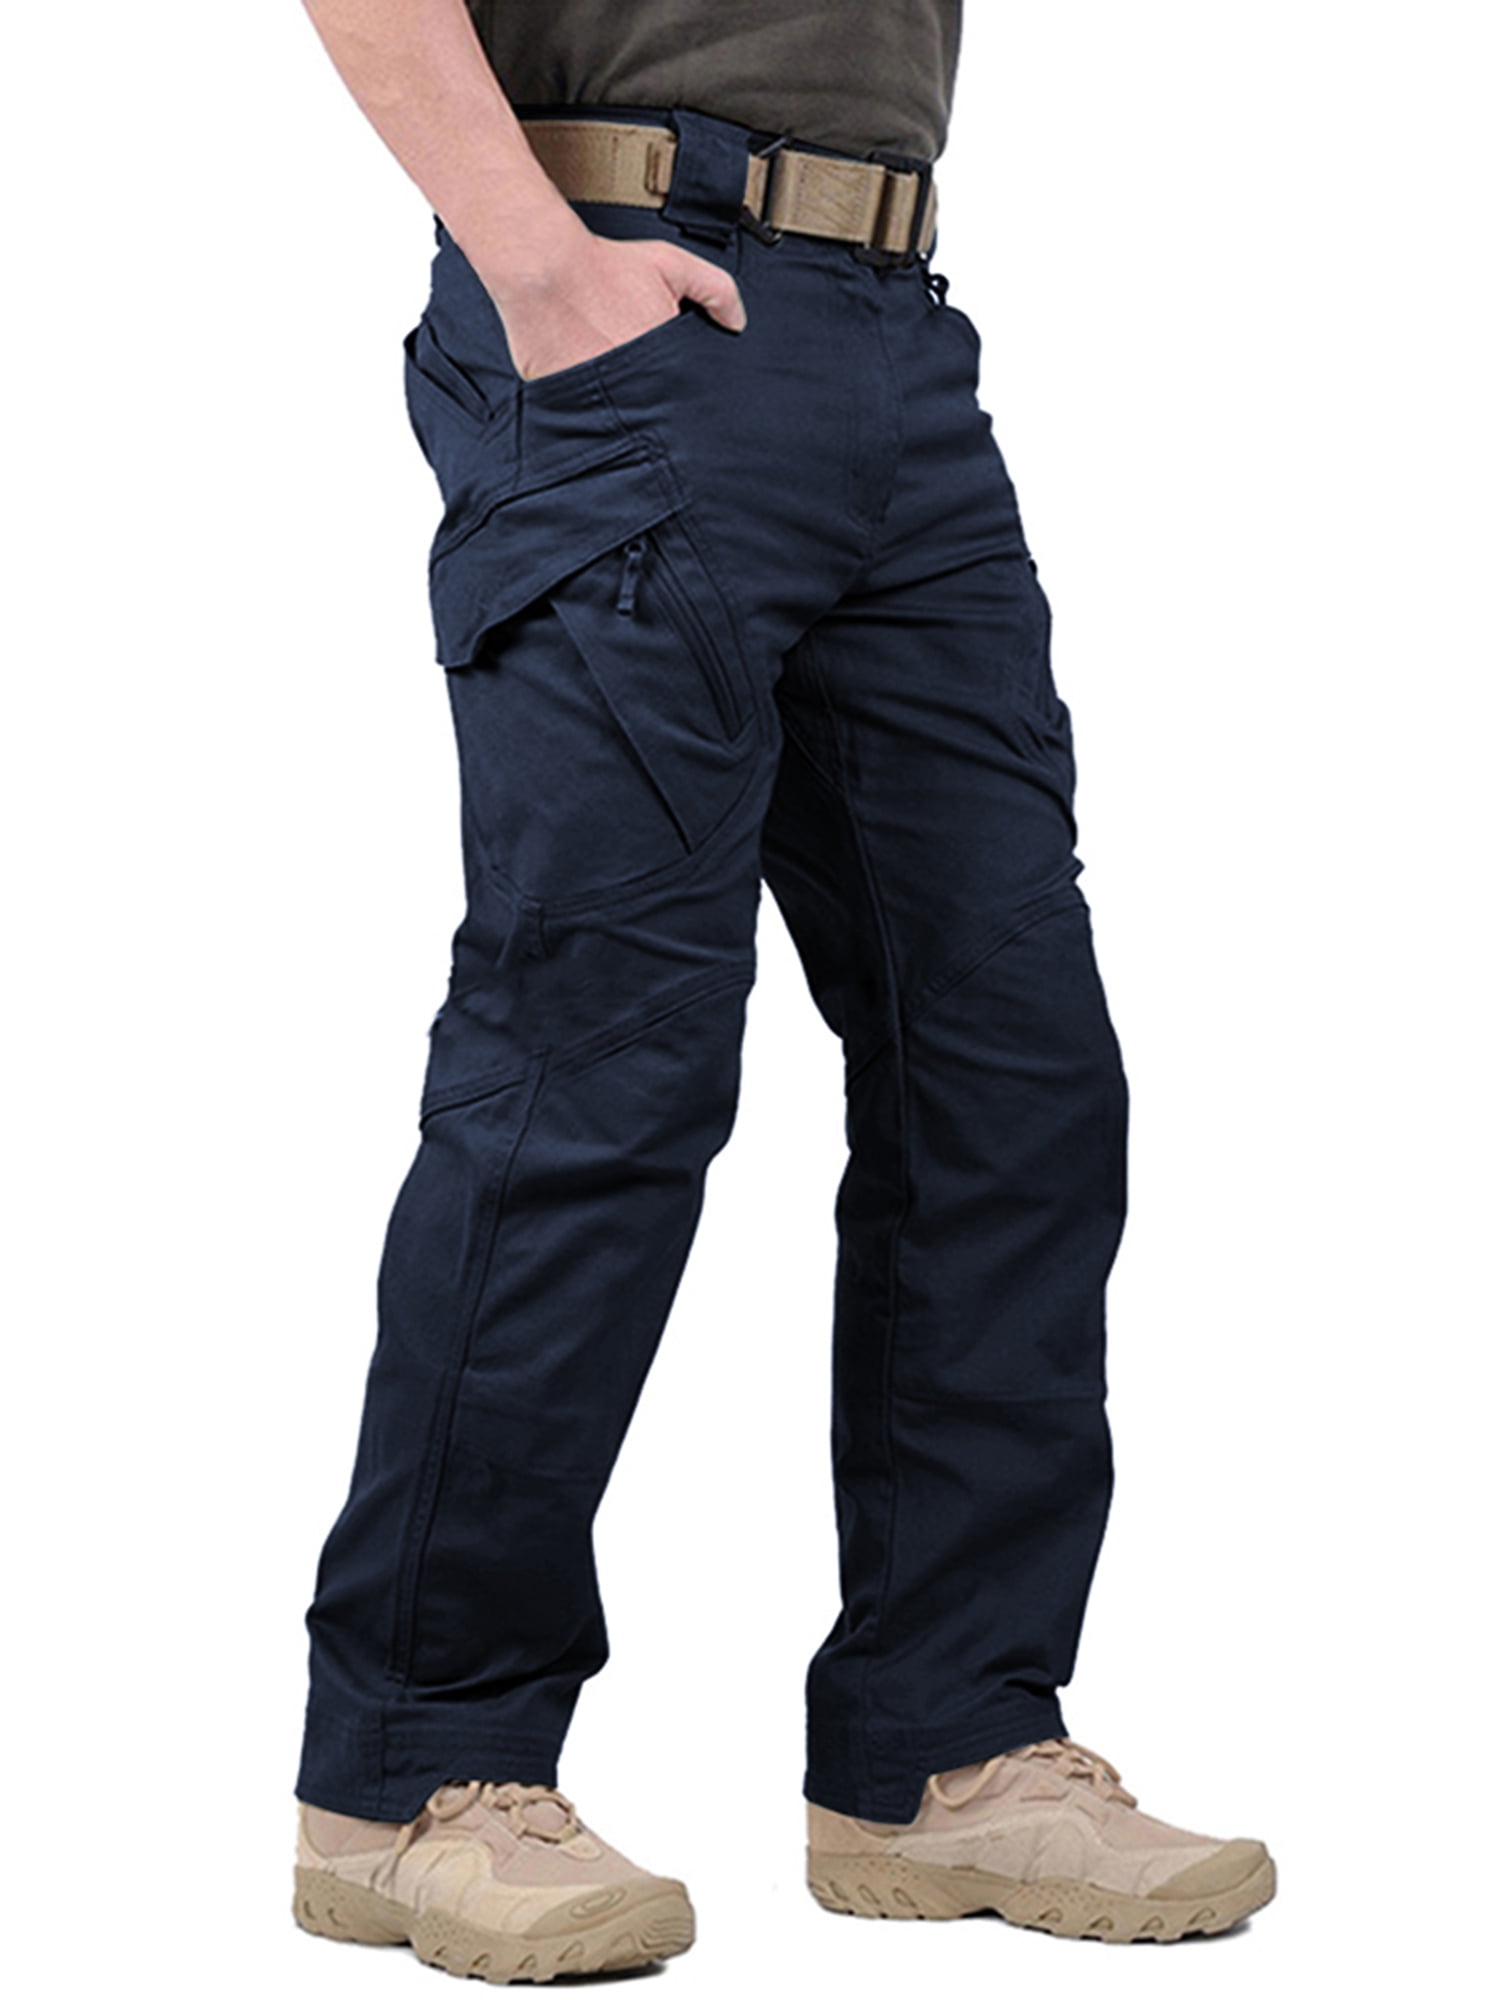 FEDTOSING Relaxed Work Cargo Pants Outdoor Mens Pant Navy Blue,Size 32× ...